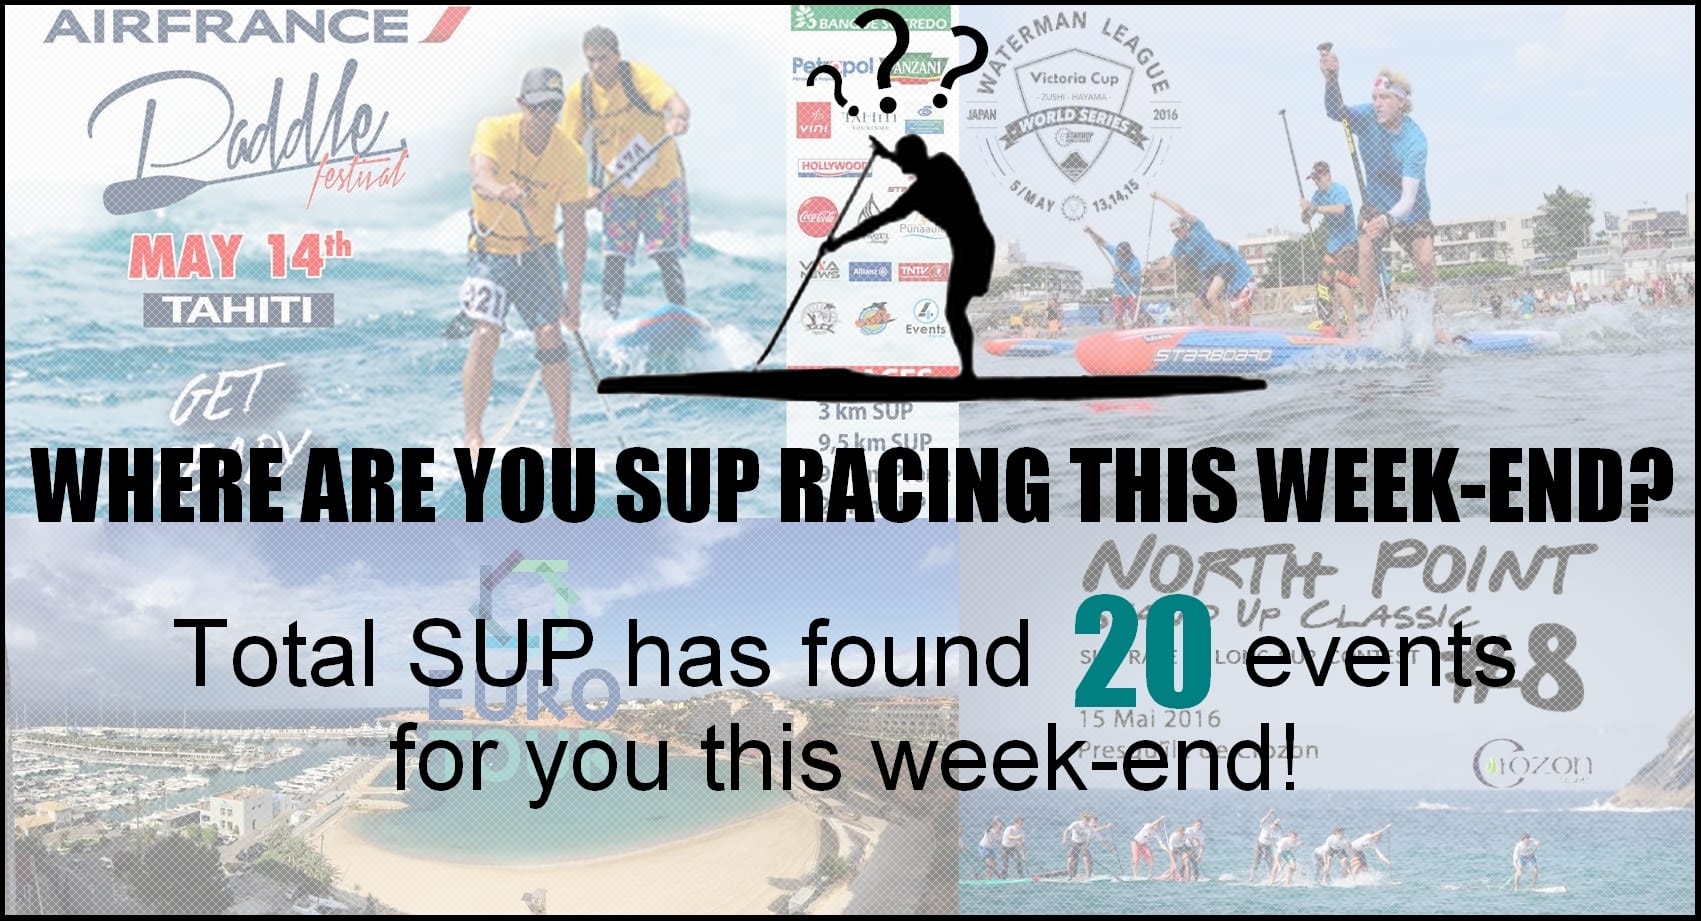 Where are you SUP racing this week-end?